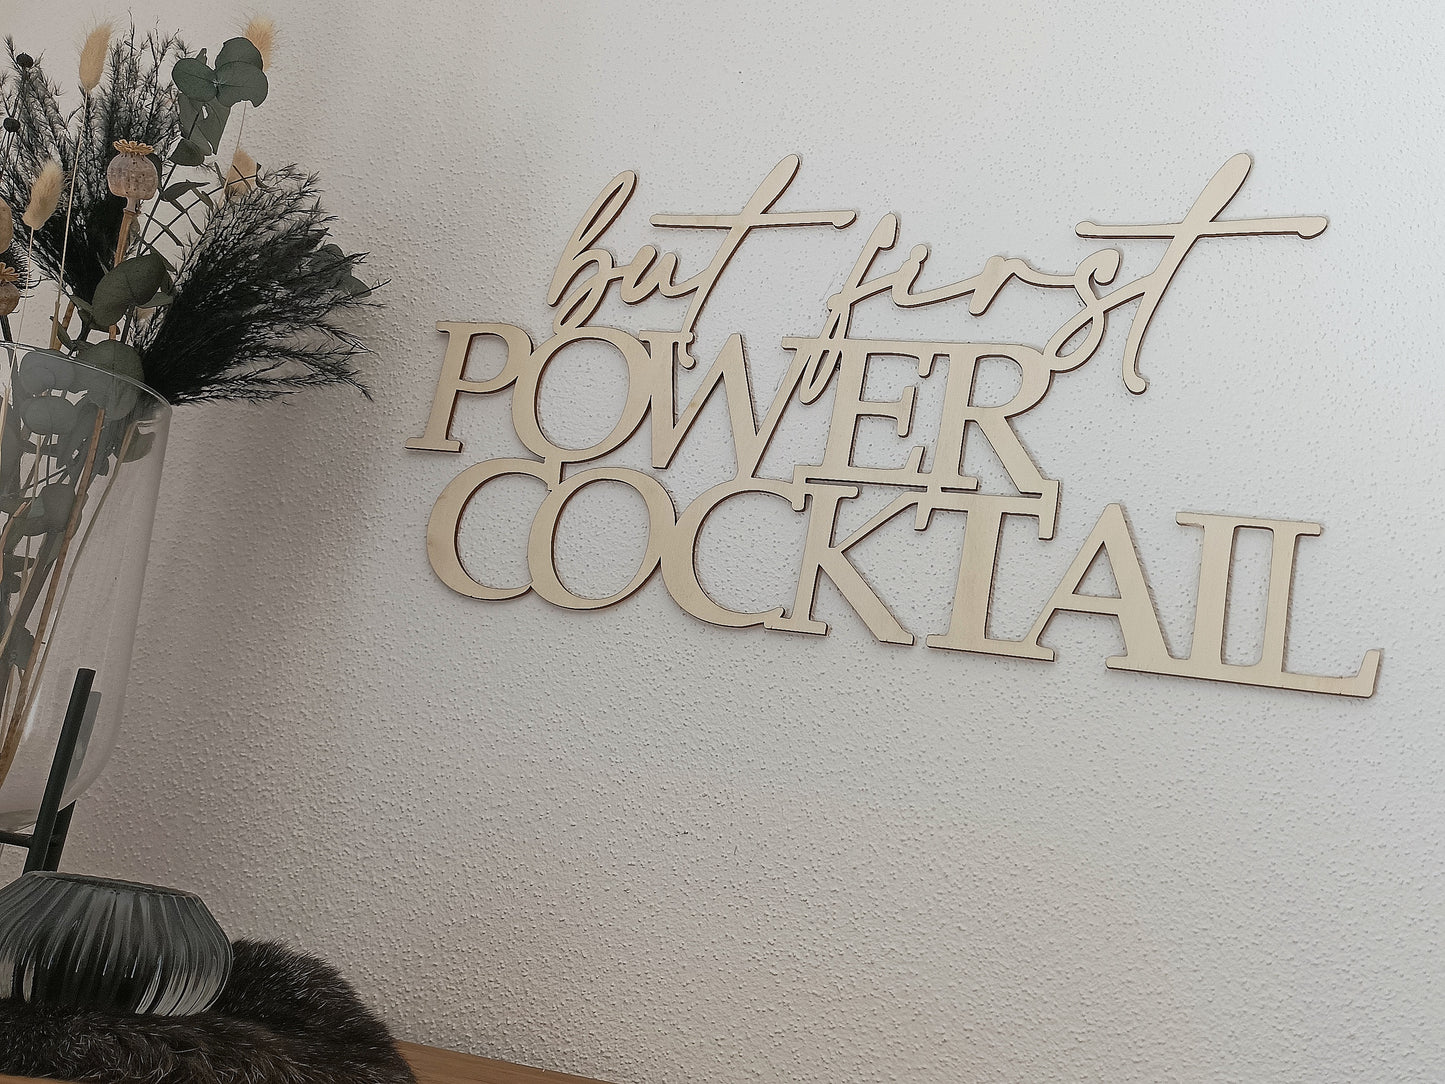 Holzspruch - But first Powercocktail